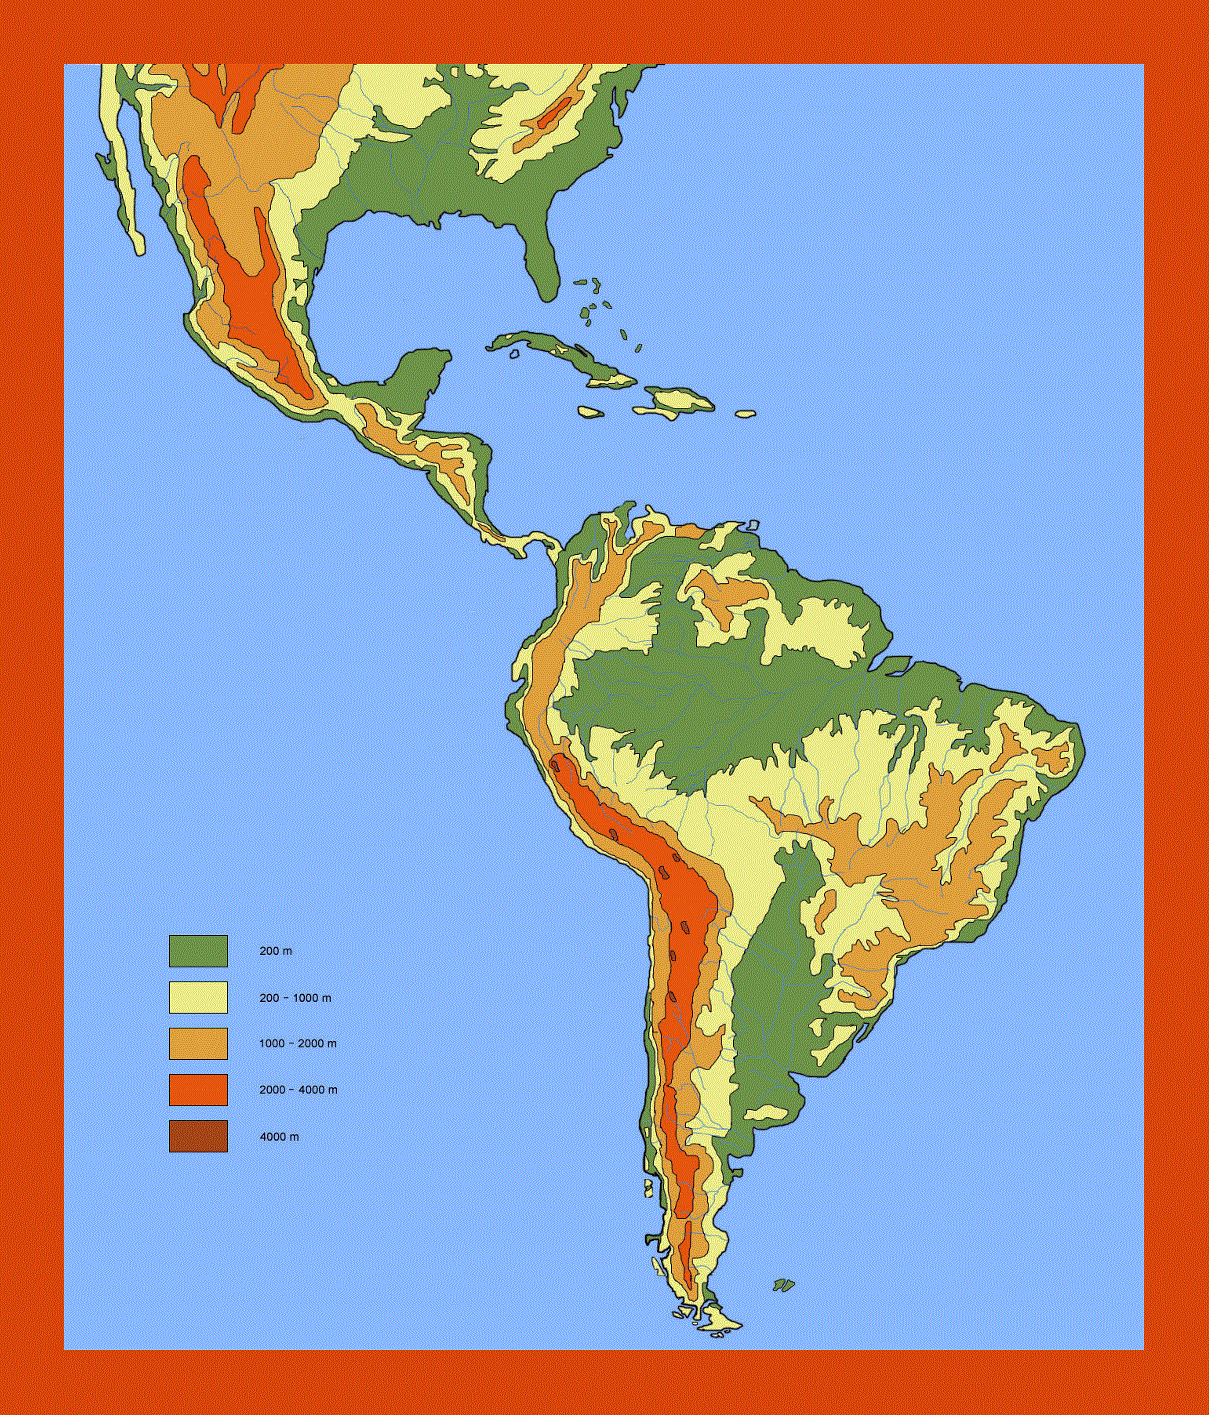 Elevation map of South America